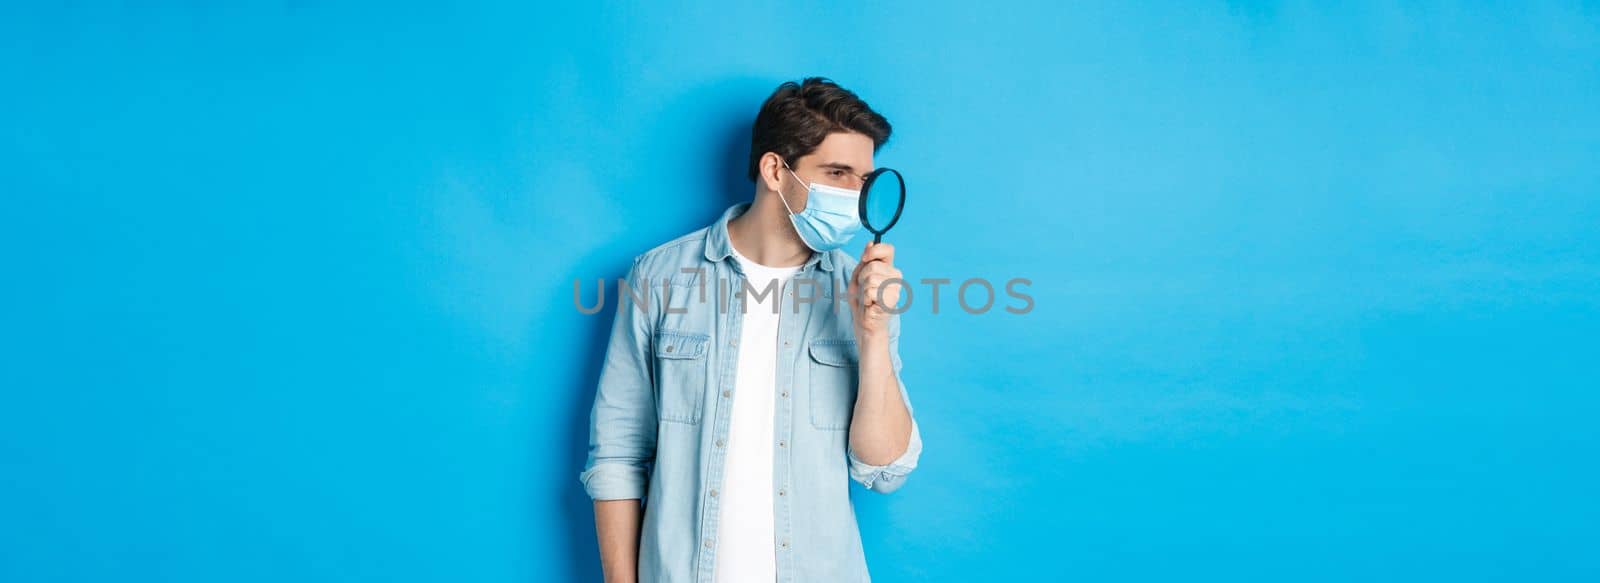 Concept of coronavirus, social distancing and pandemic. Man in medical mask searching for something, looking left through magnifying glass, studying copy space, blue background.